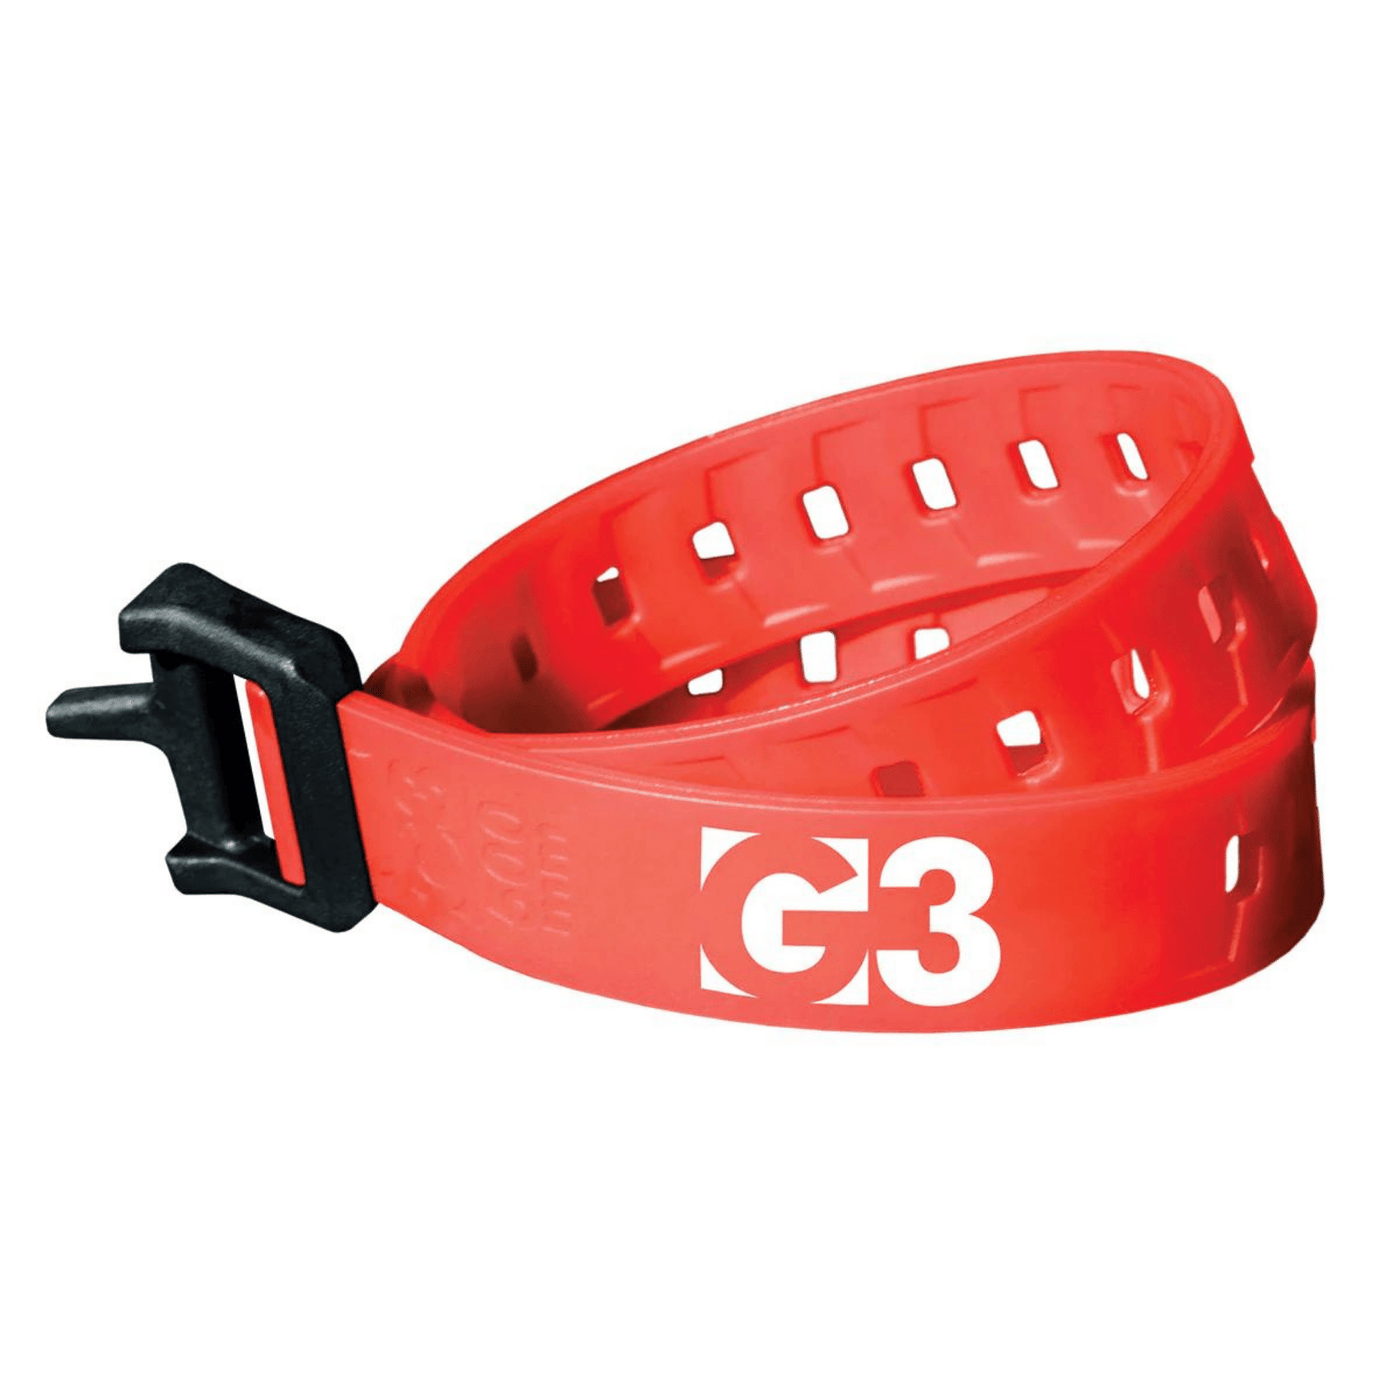 G3 Ski Strap - 500mm | Backcountry & Skiing Gear | Further Faster Christchurch NZ #universal-red